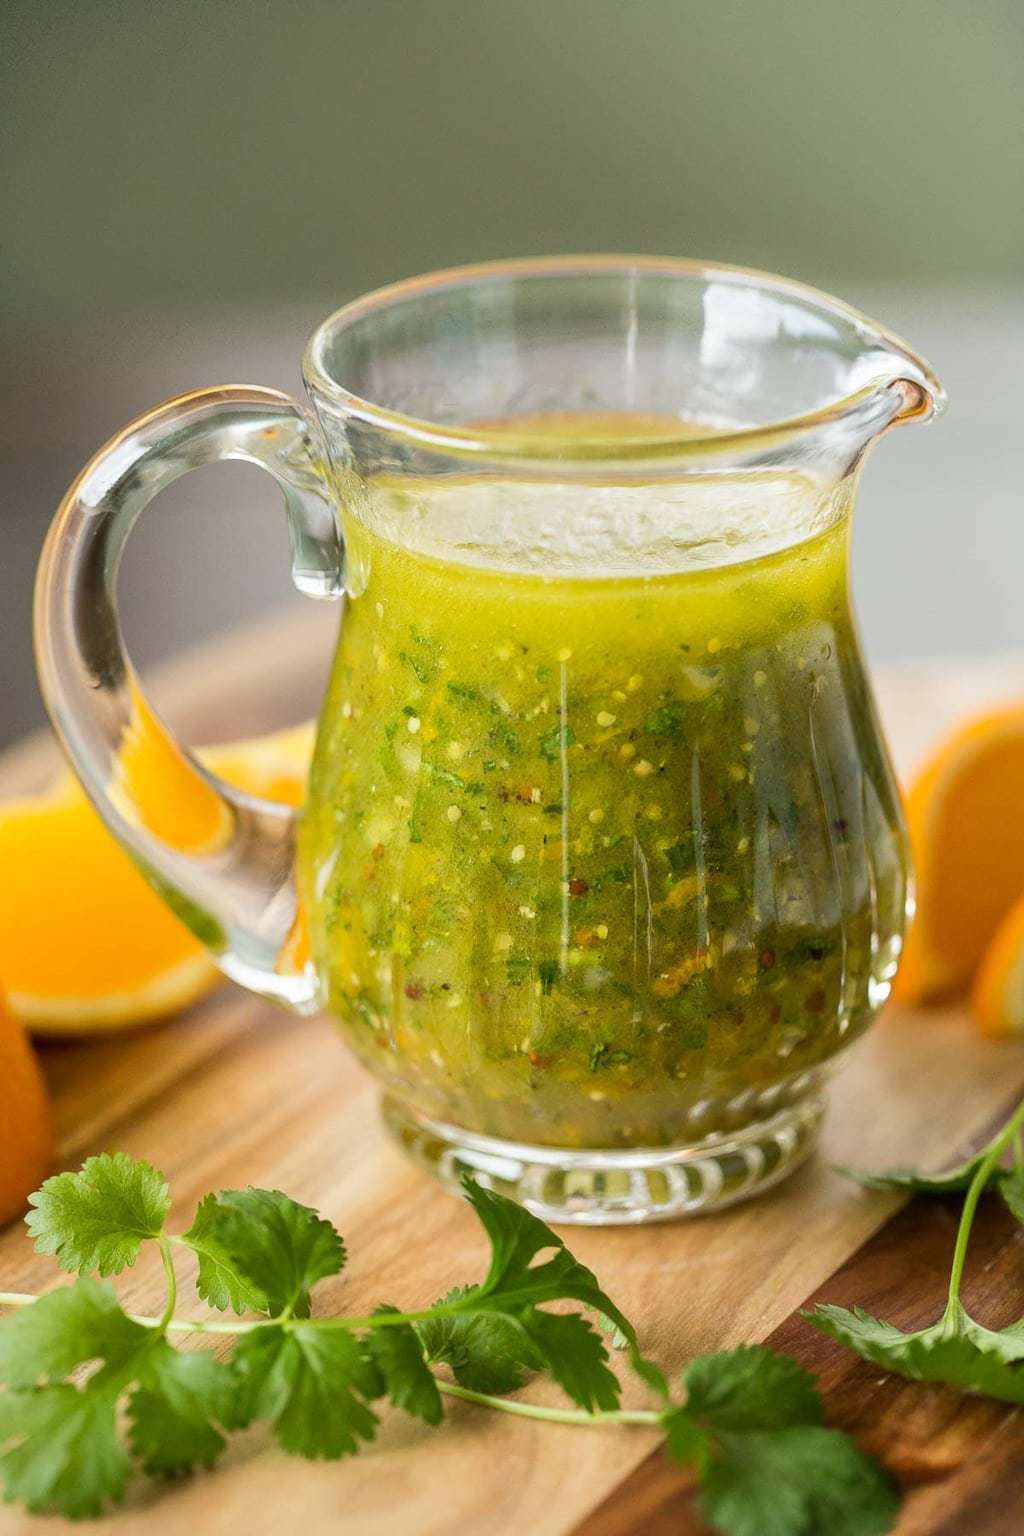 Photo of a glass pitcher filled with Orange Cilantro Vinaigrette on a wood cutting board surrounded by orange wedges and cilantro leaves.